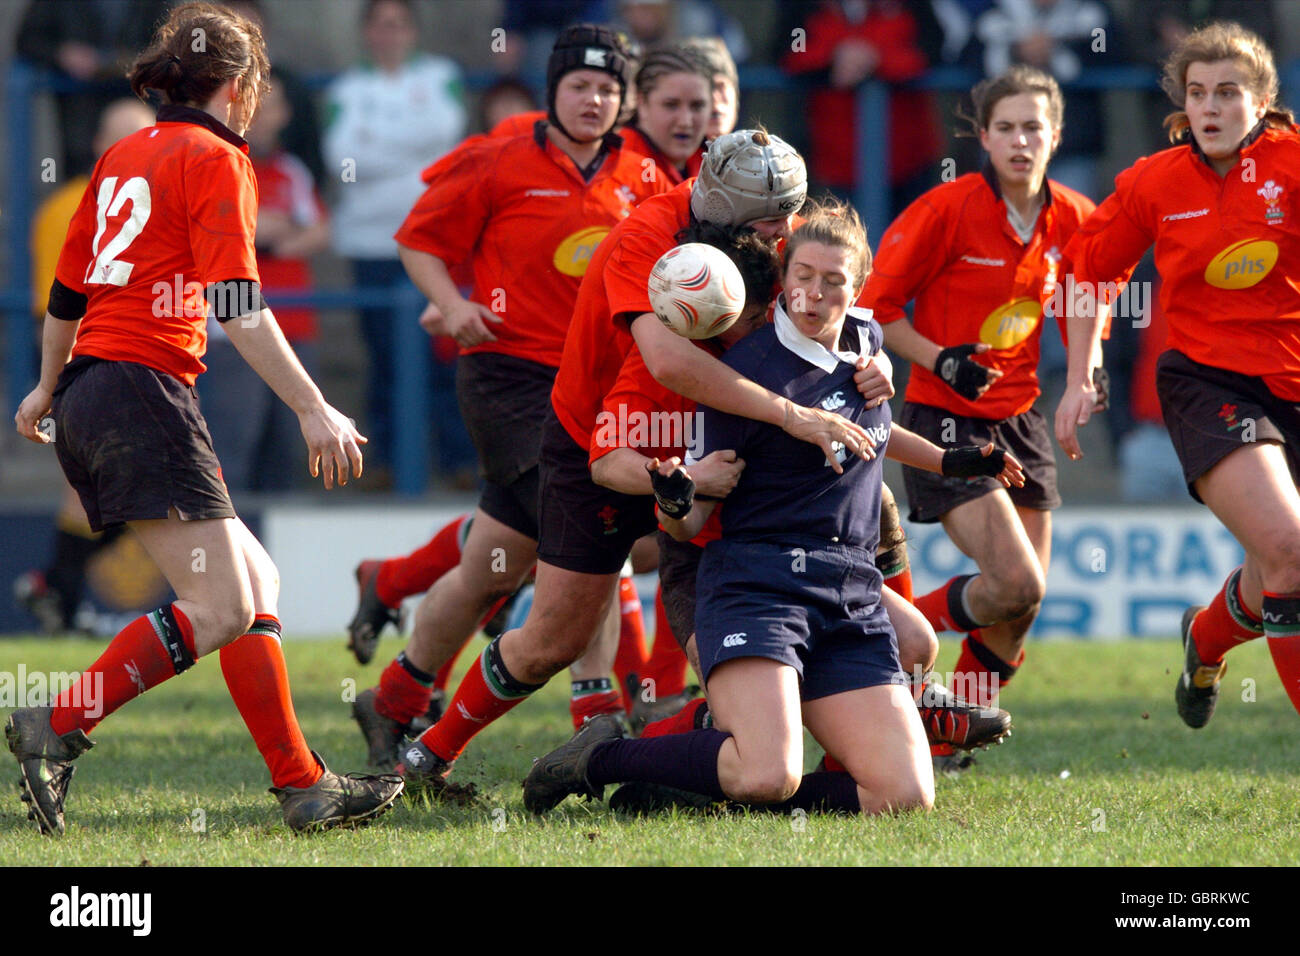 Rugby Union - The Womens Six Nations Championship - Wales / Schottland. Alison Newall, Schottland Stockfoto